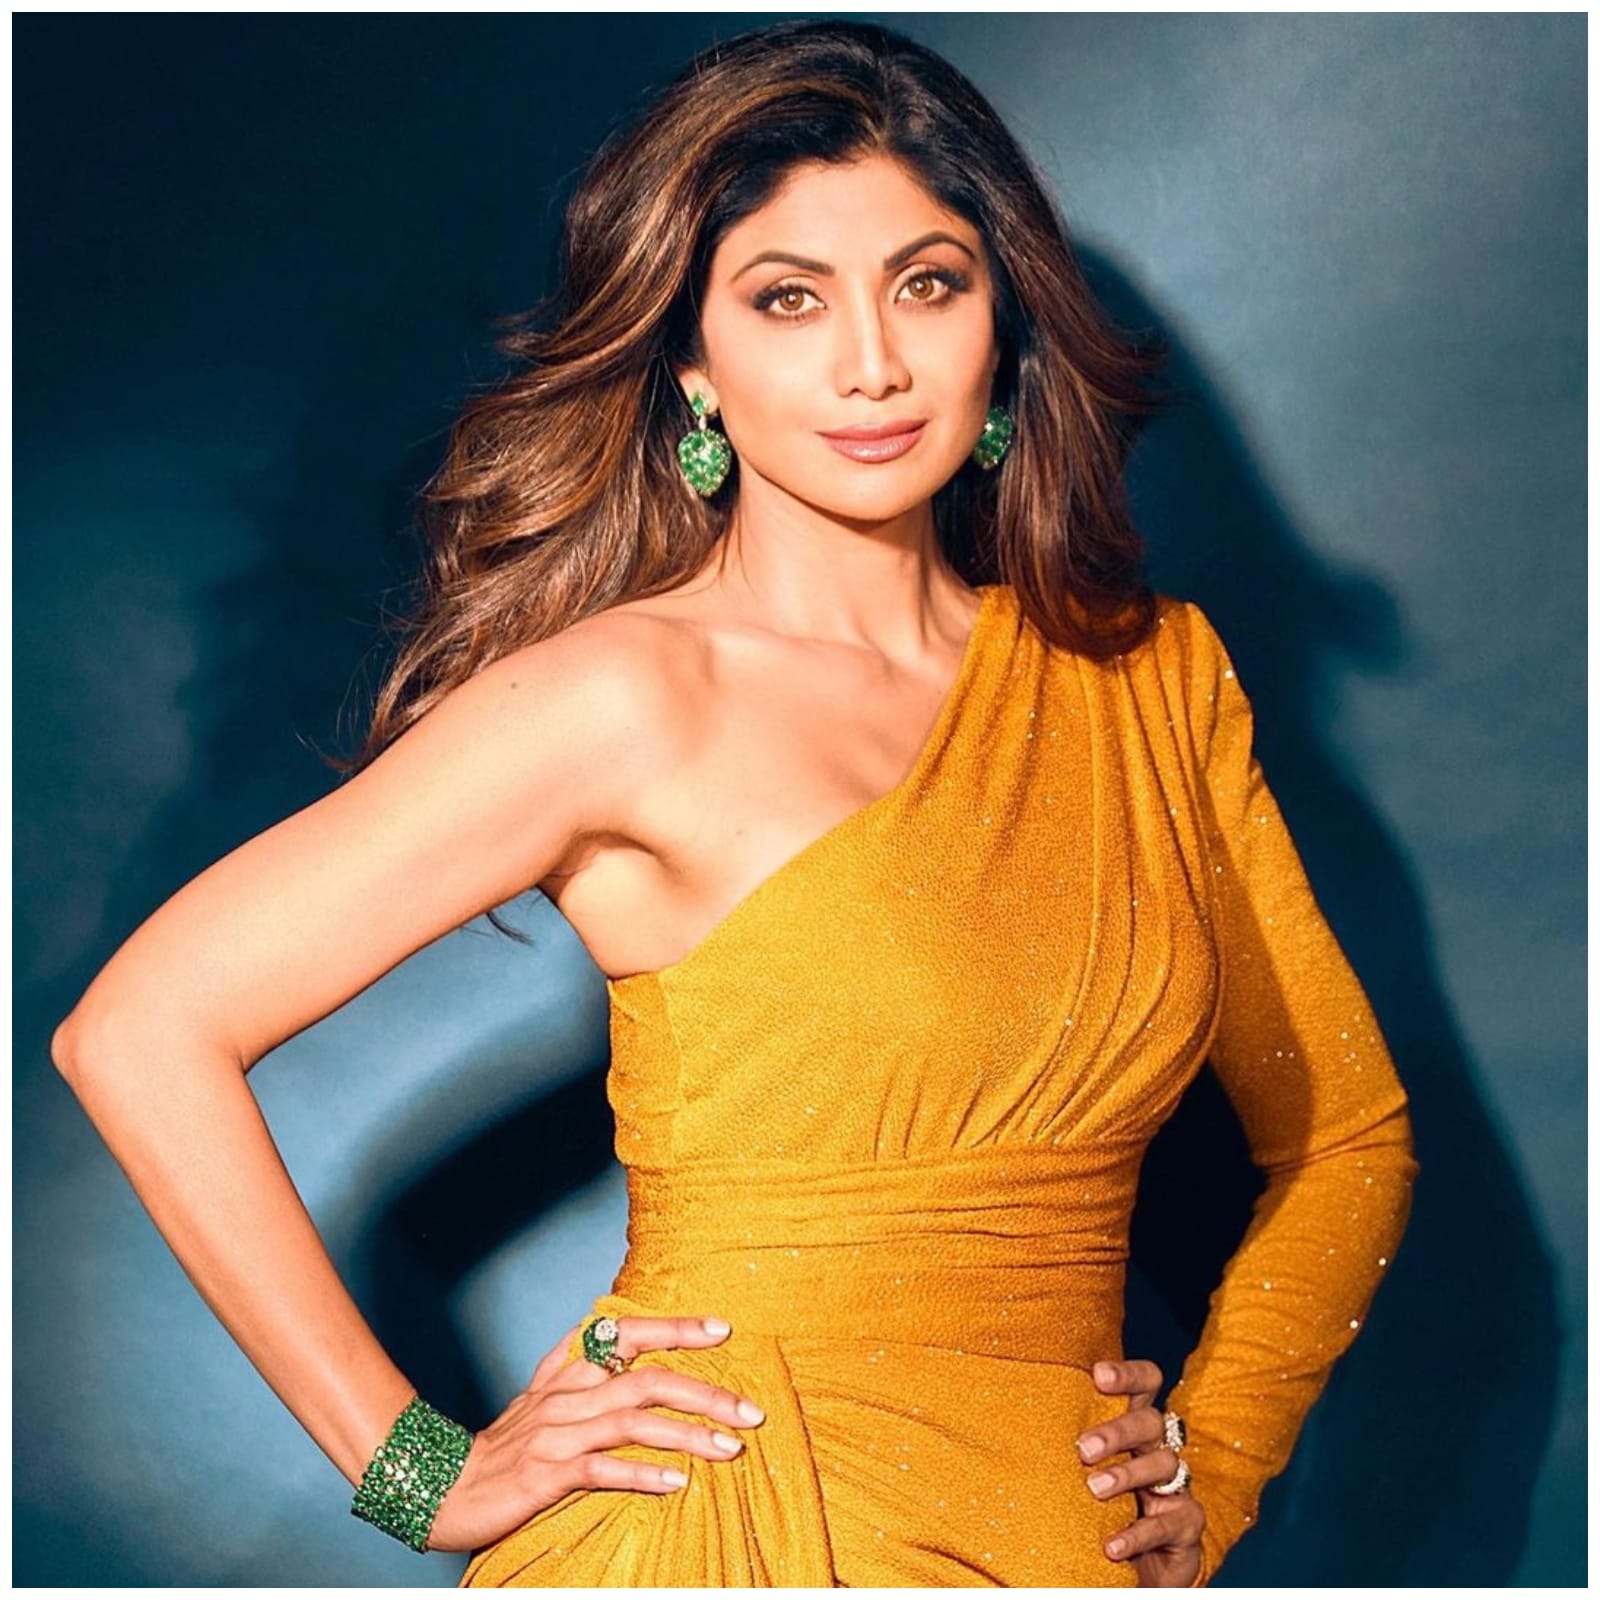 Akshra Singj Sex Real - Bollywood Rallies Behind Shilpa Shetty as She Breaks Silence on Raj Kundra  Case, Requests for Privacy